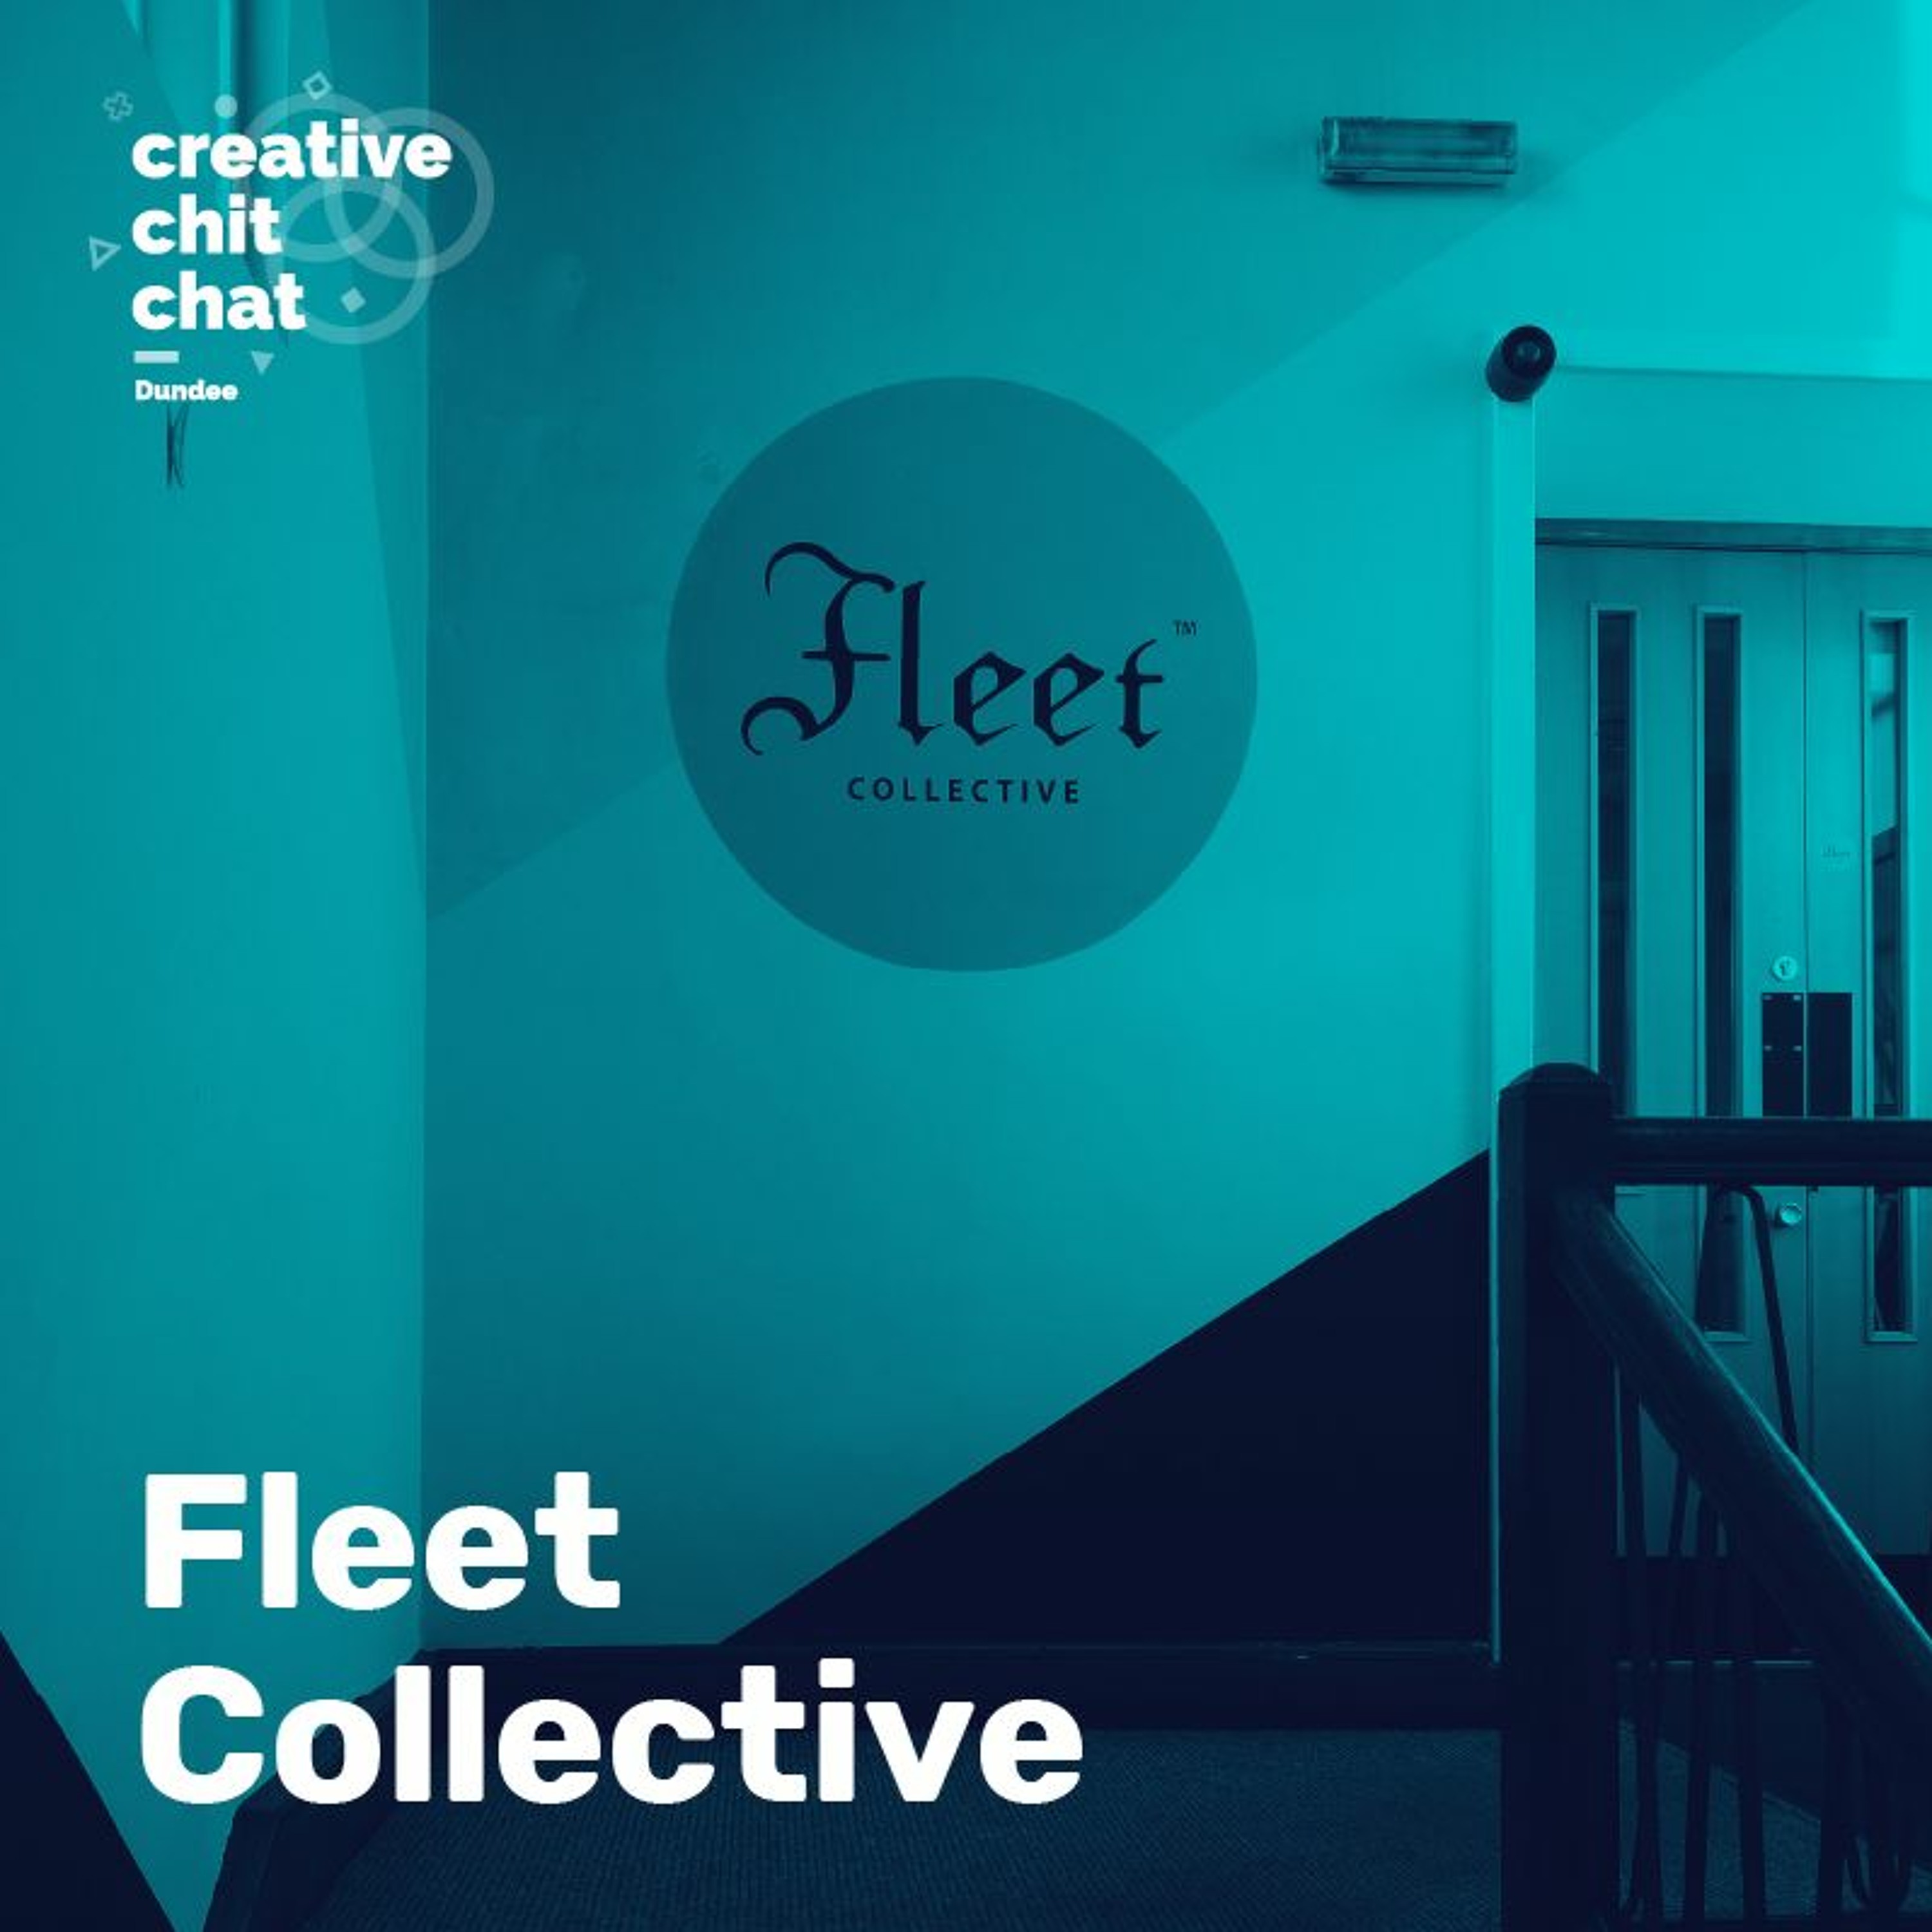 Fleet Collective - The rise and fall of a creative co-working space